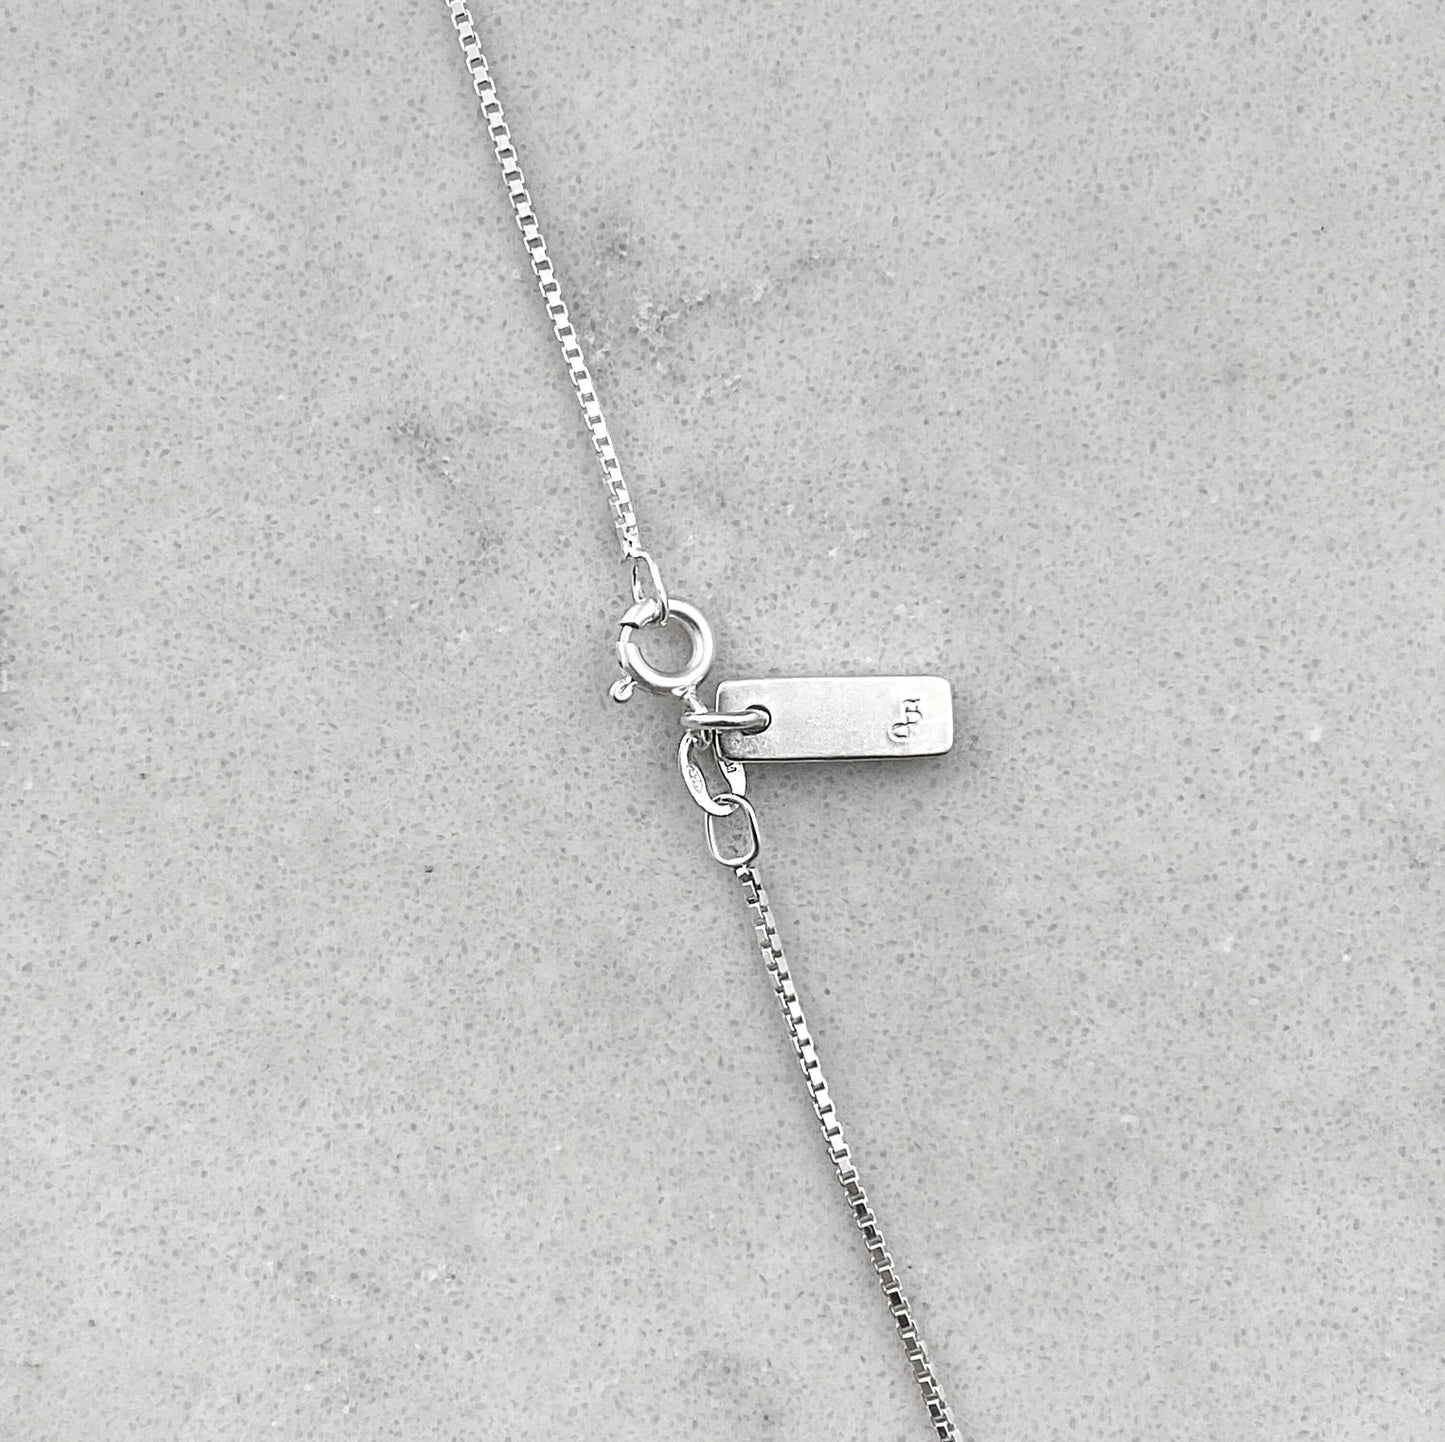 Close up on details of a silver necklace